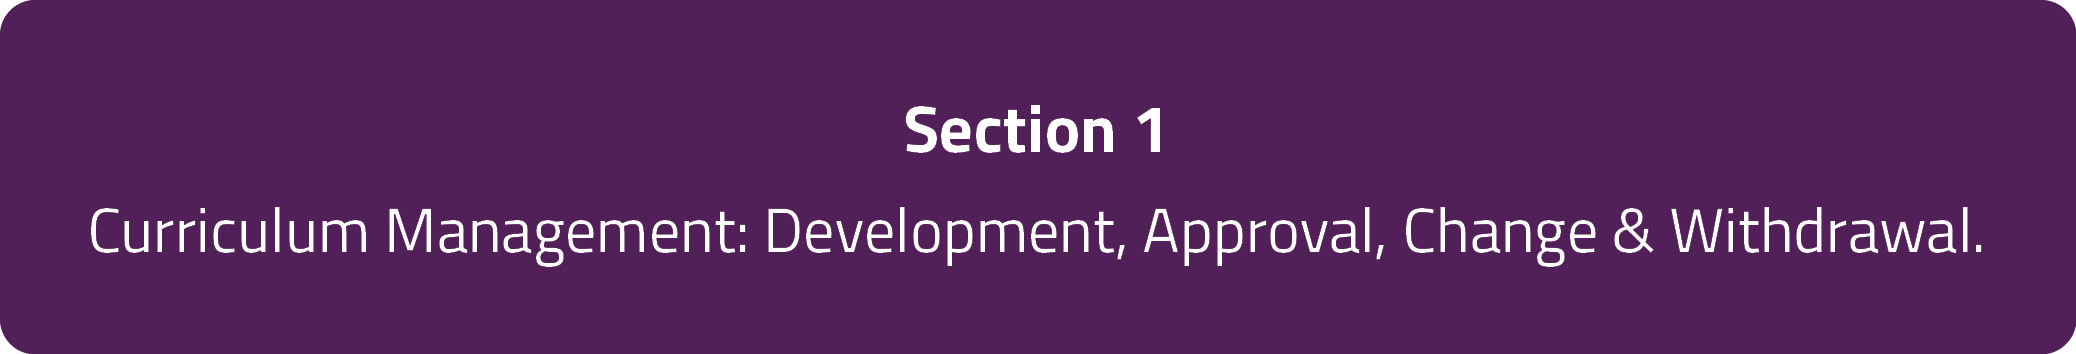 Section 1. Curriculum Management: Development, Approval, Change & Withdrawal